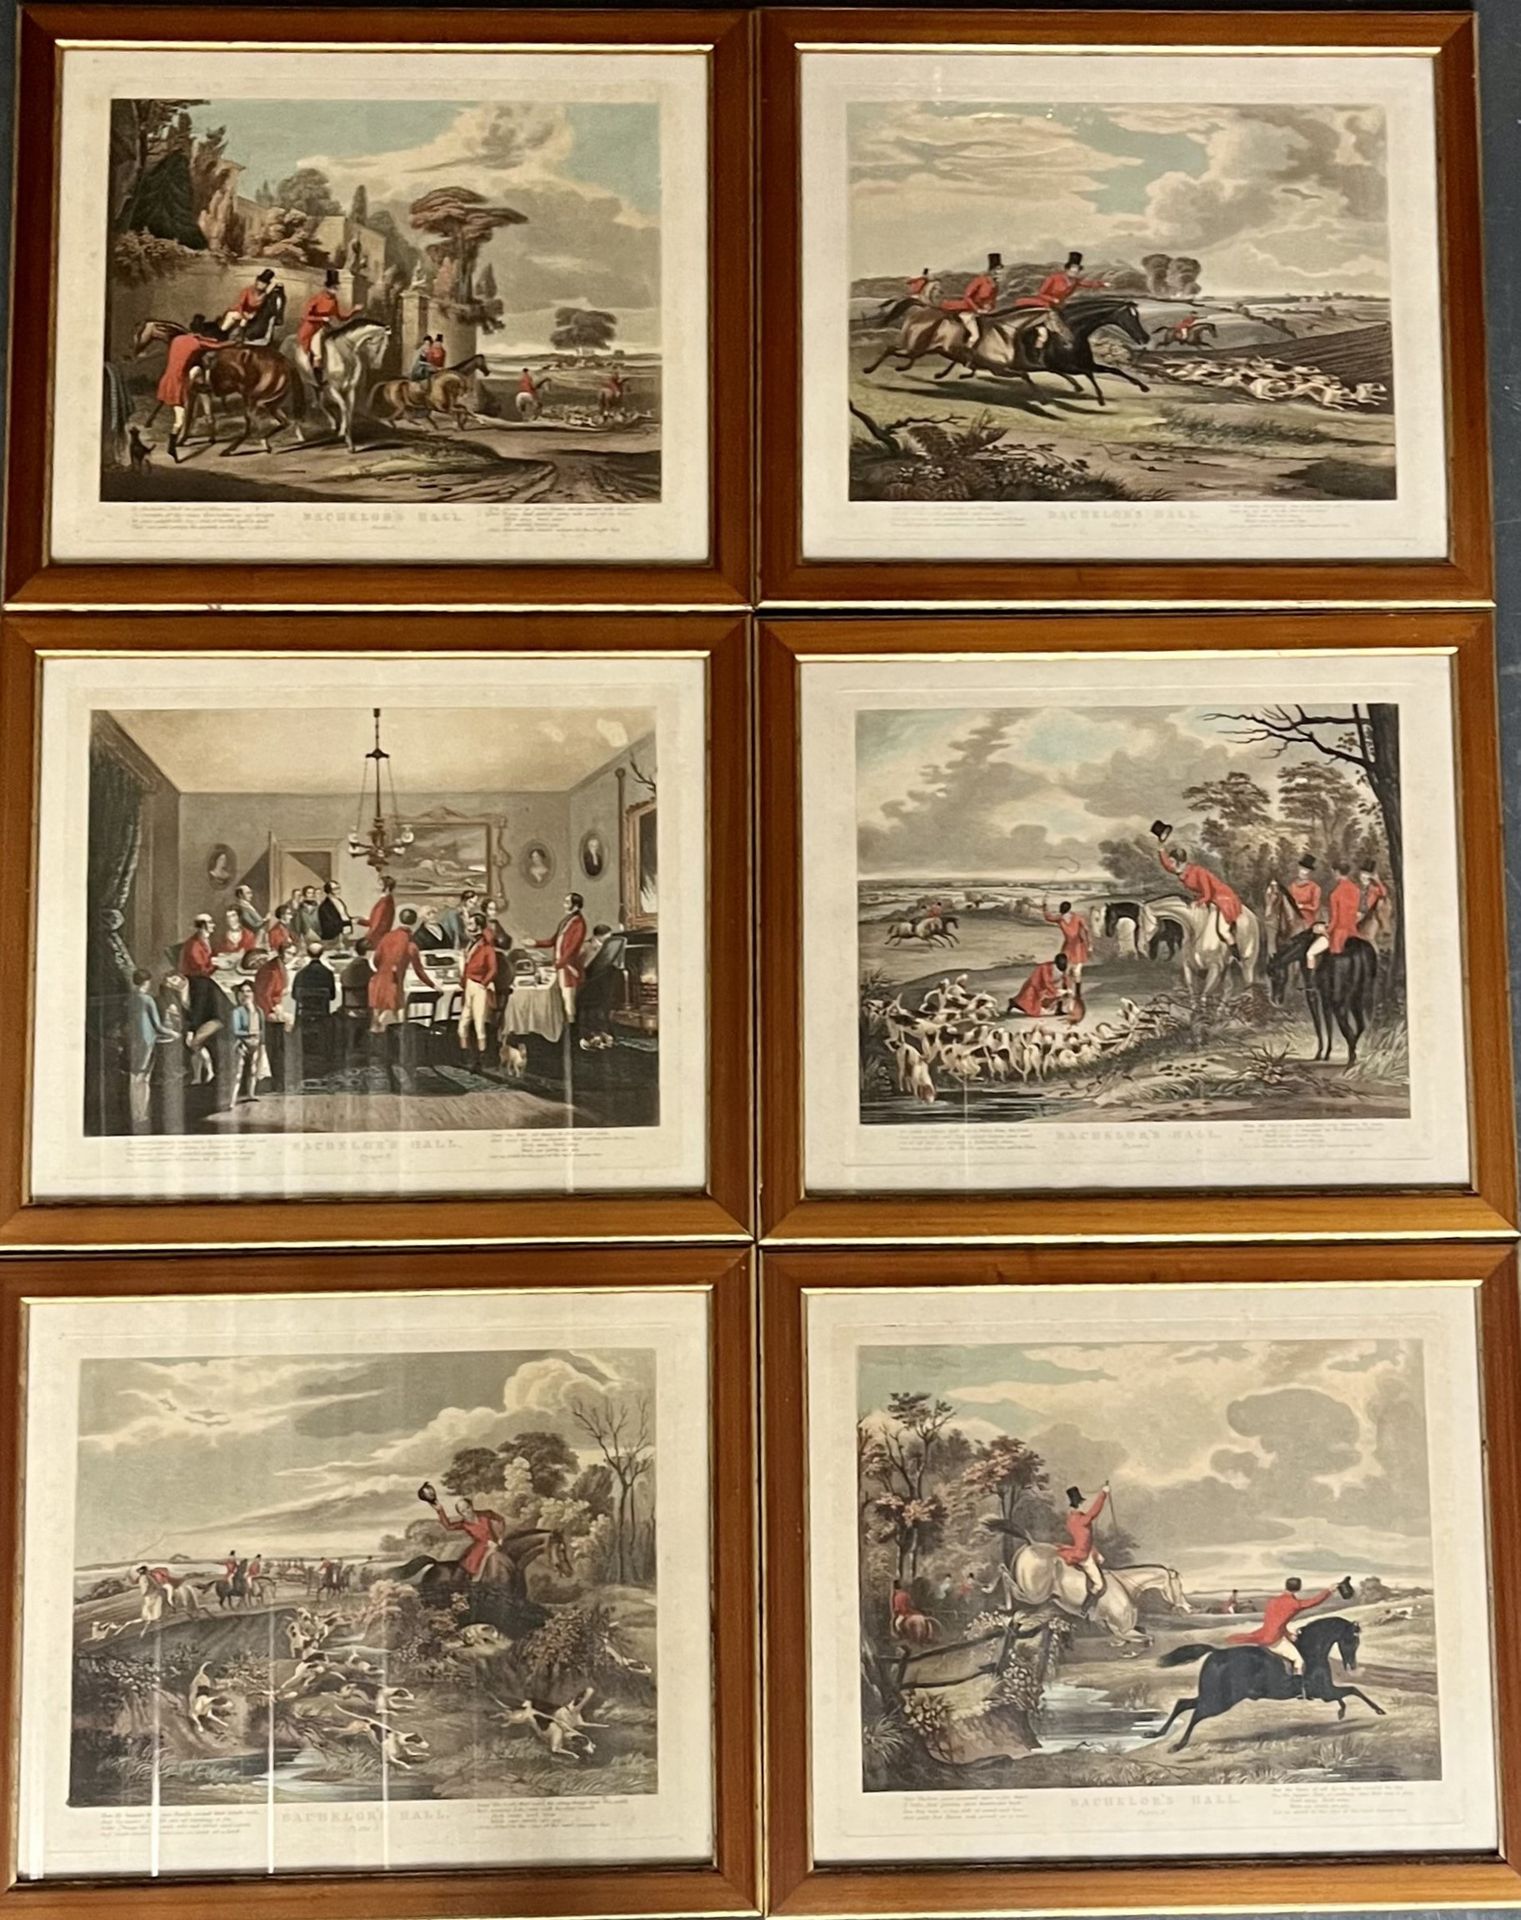 Angleterre du XIXe siècle "Scenes de chasse a courre"
Suite of six engravings in&hellip;